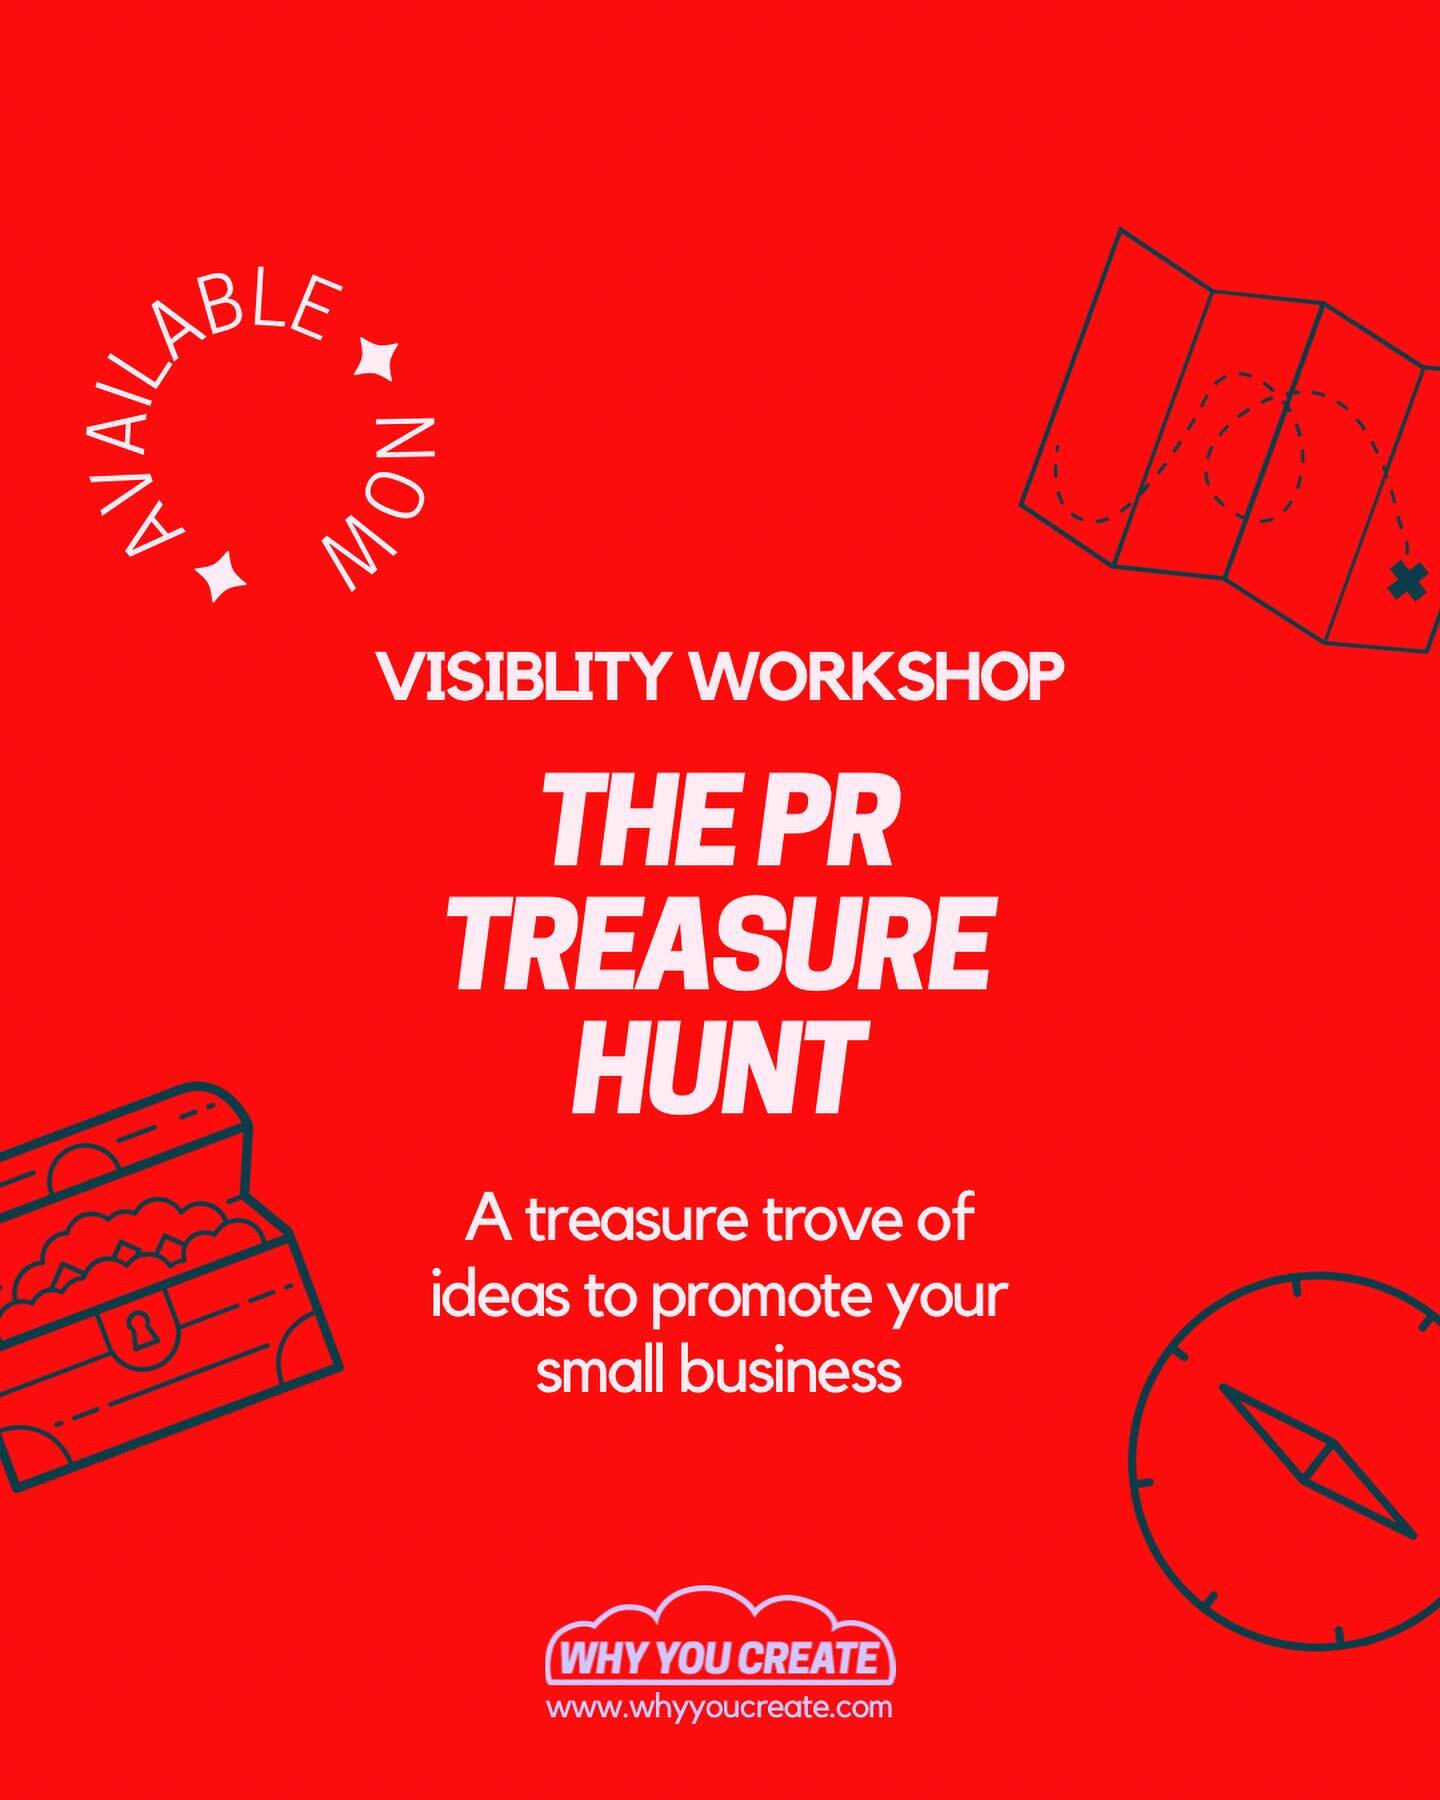 Get your brain whizzing with ideas to get visible beyond social media with this PR workshop 🎉

💎 The PR Treasure Hunt 💎

Covering collaborations, podcast guesting, speaking opportunities, guest articles, guest teaching, partnerships, press, listin